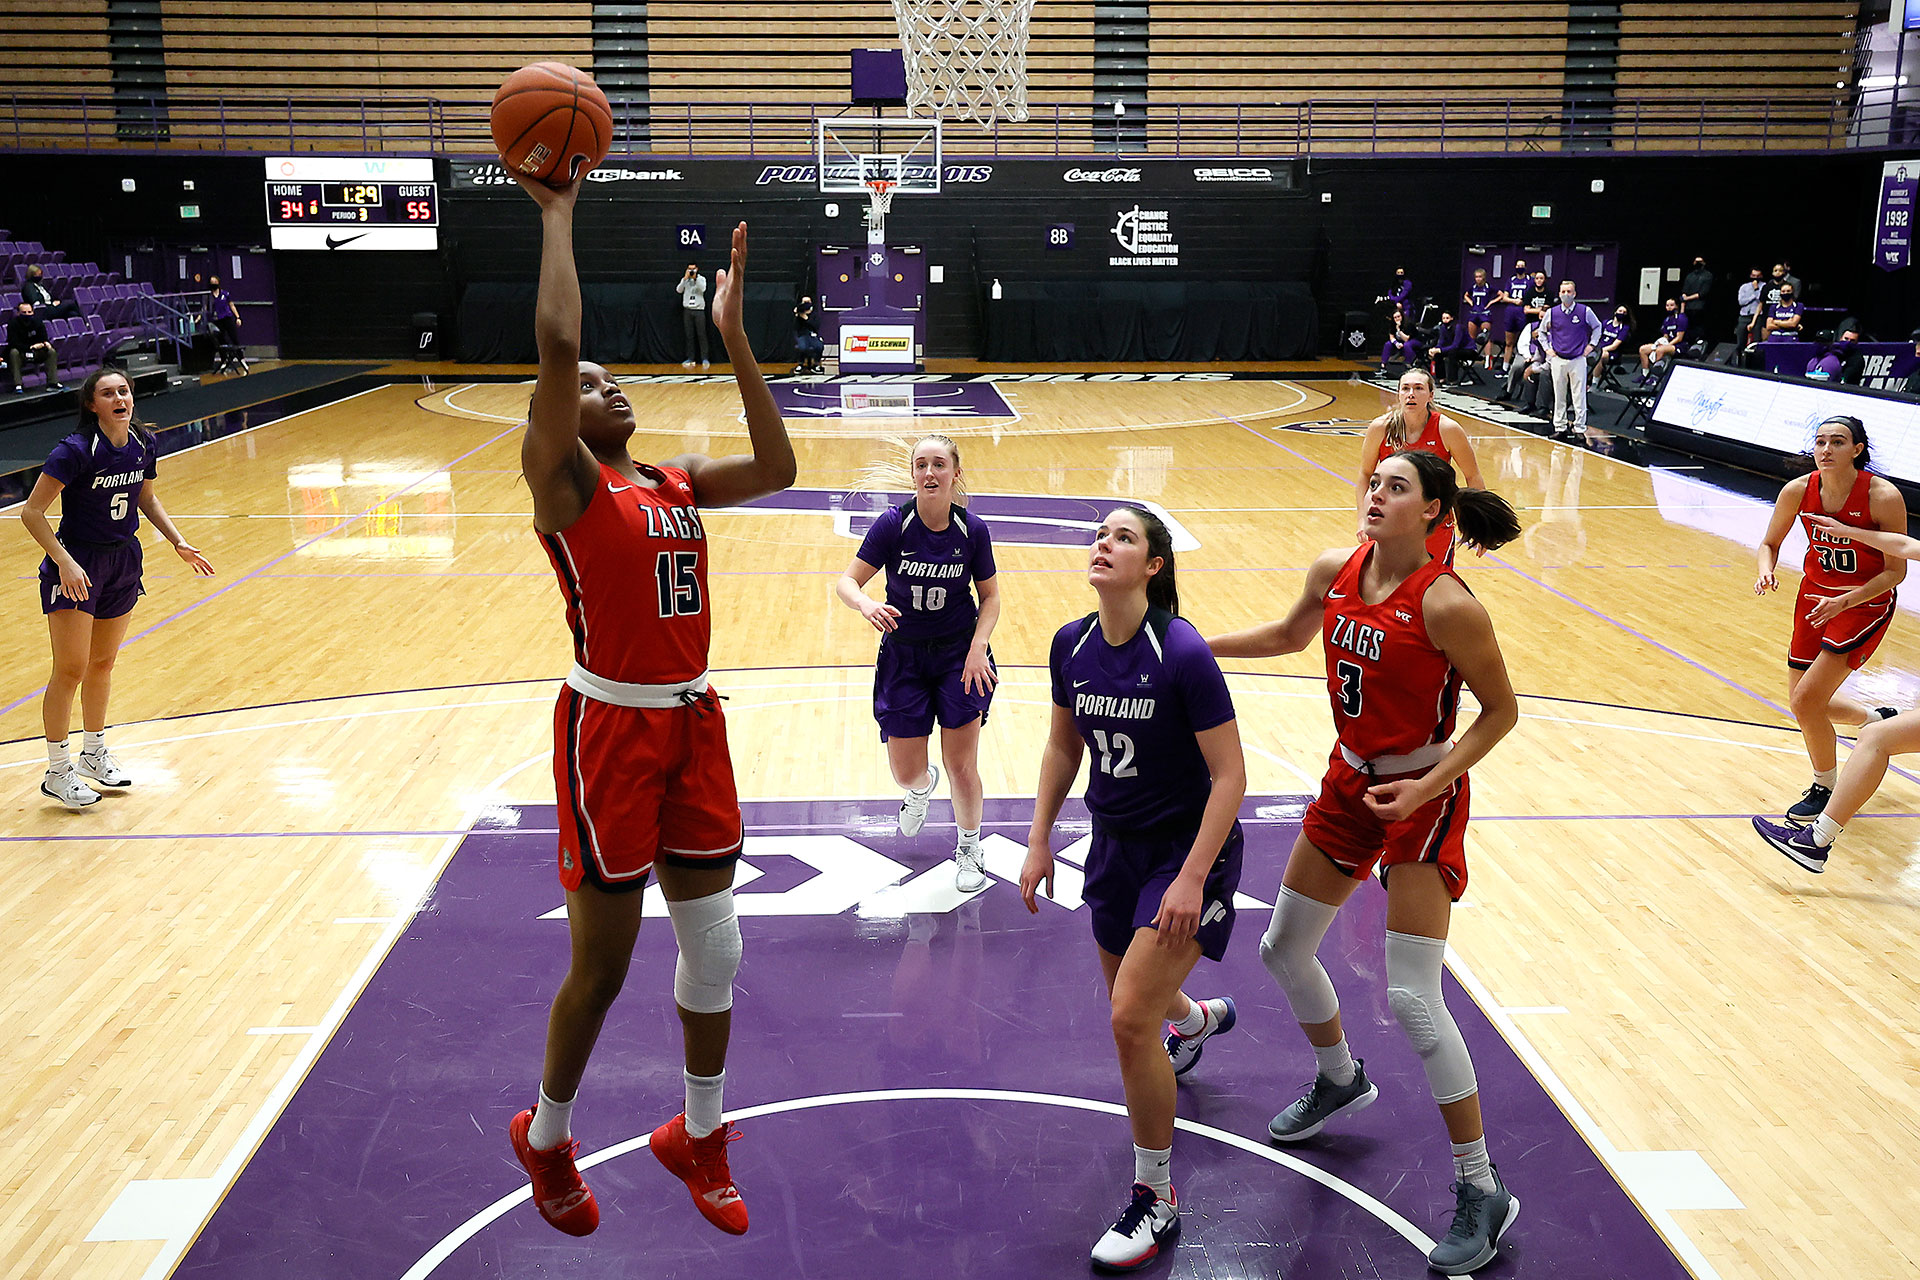 Yvonne Ejim #15 of the Gonzaga Bulldogs shoots the ball as Alex Fowler #12 of the Portland Pilots looks